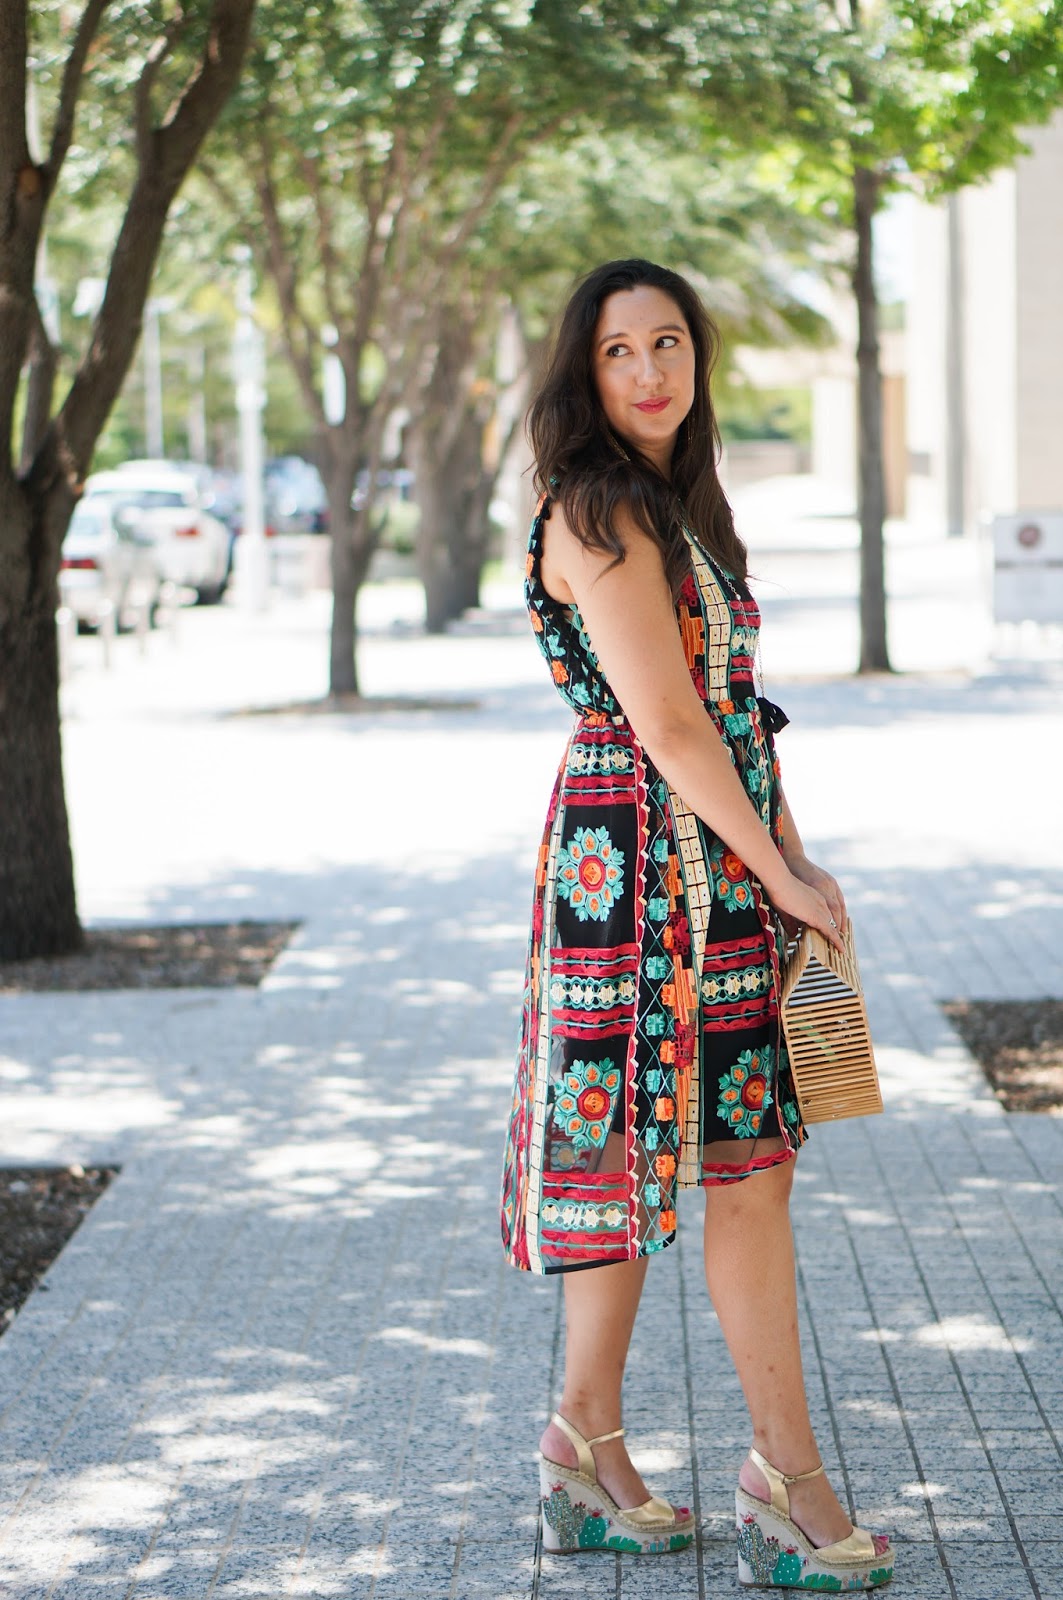 Amelia B. in the Big D.: A dress fit for a fiesta